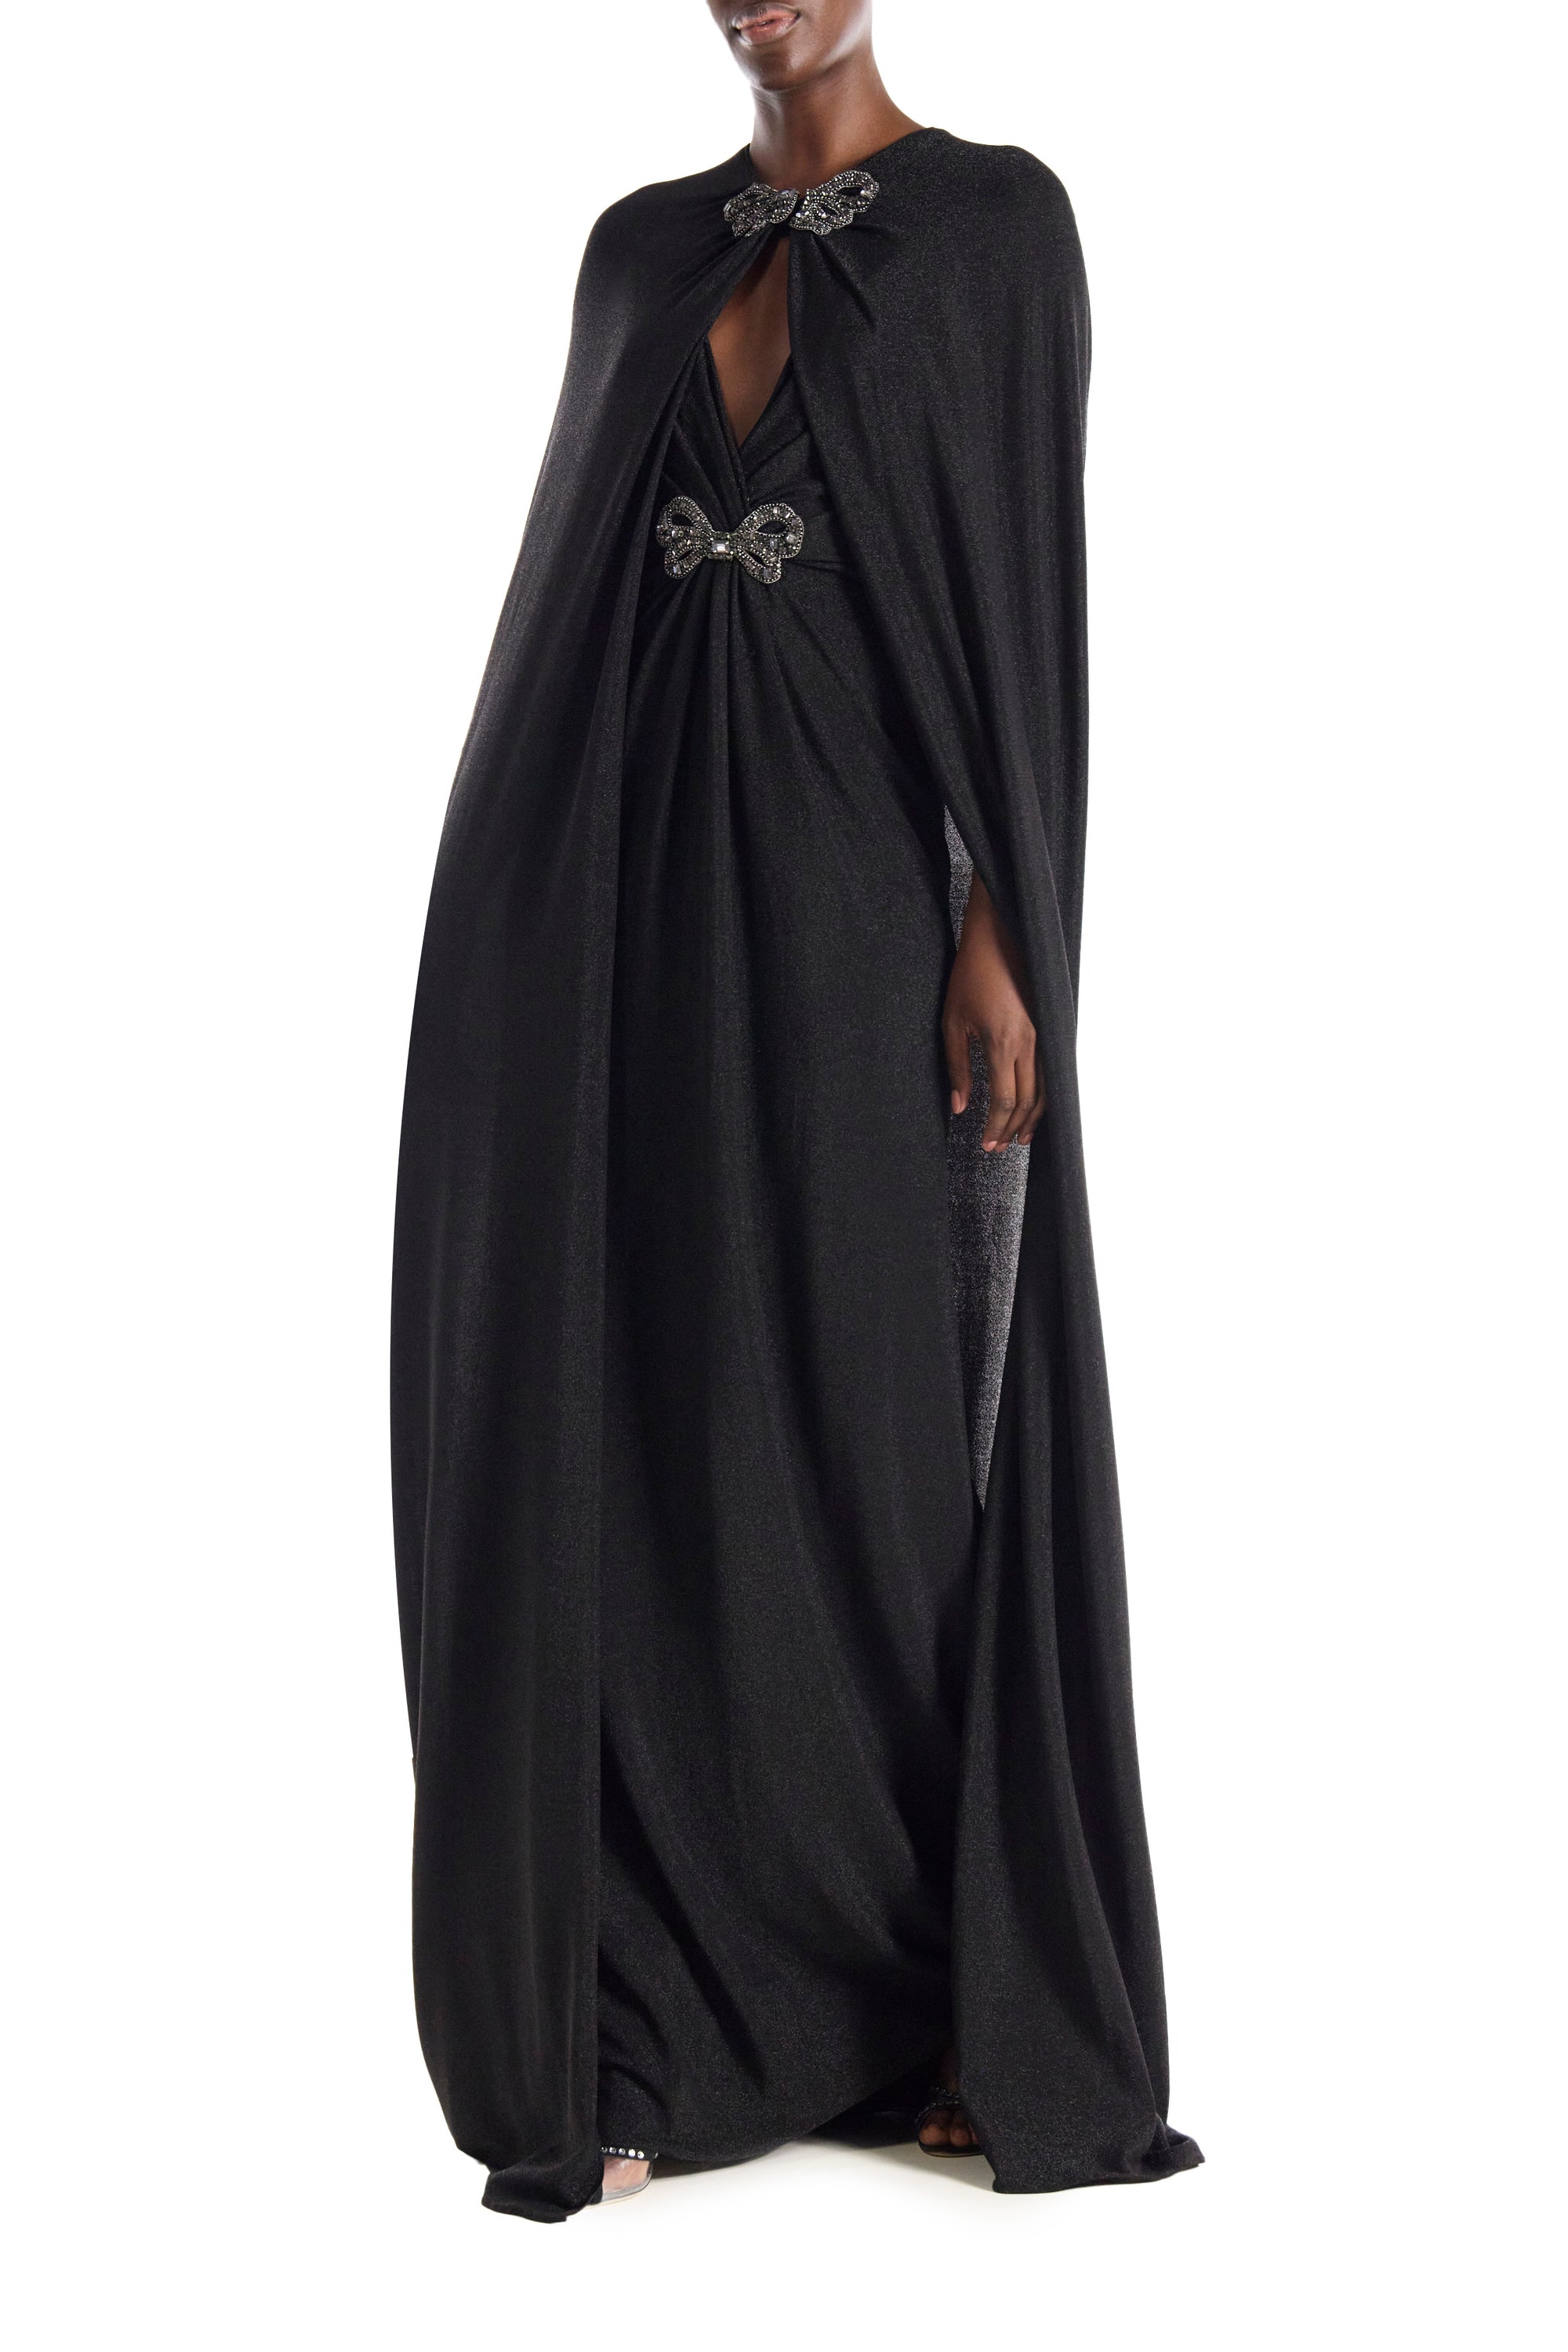 Monique Lhuillier black glitter knit evening cape with embroidered bow closure at neckline.